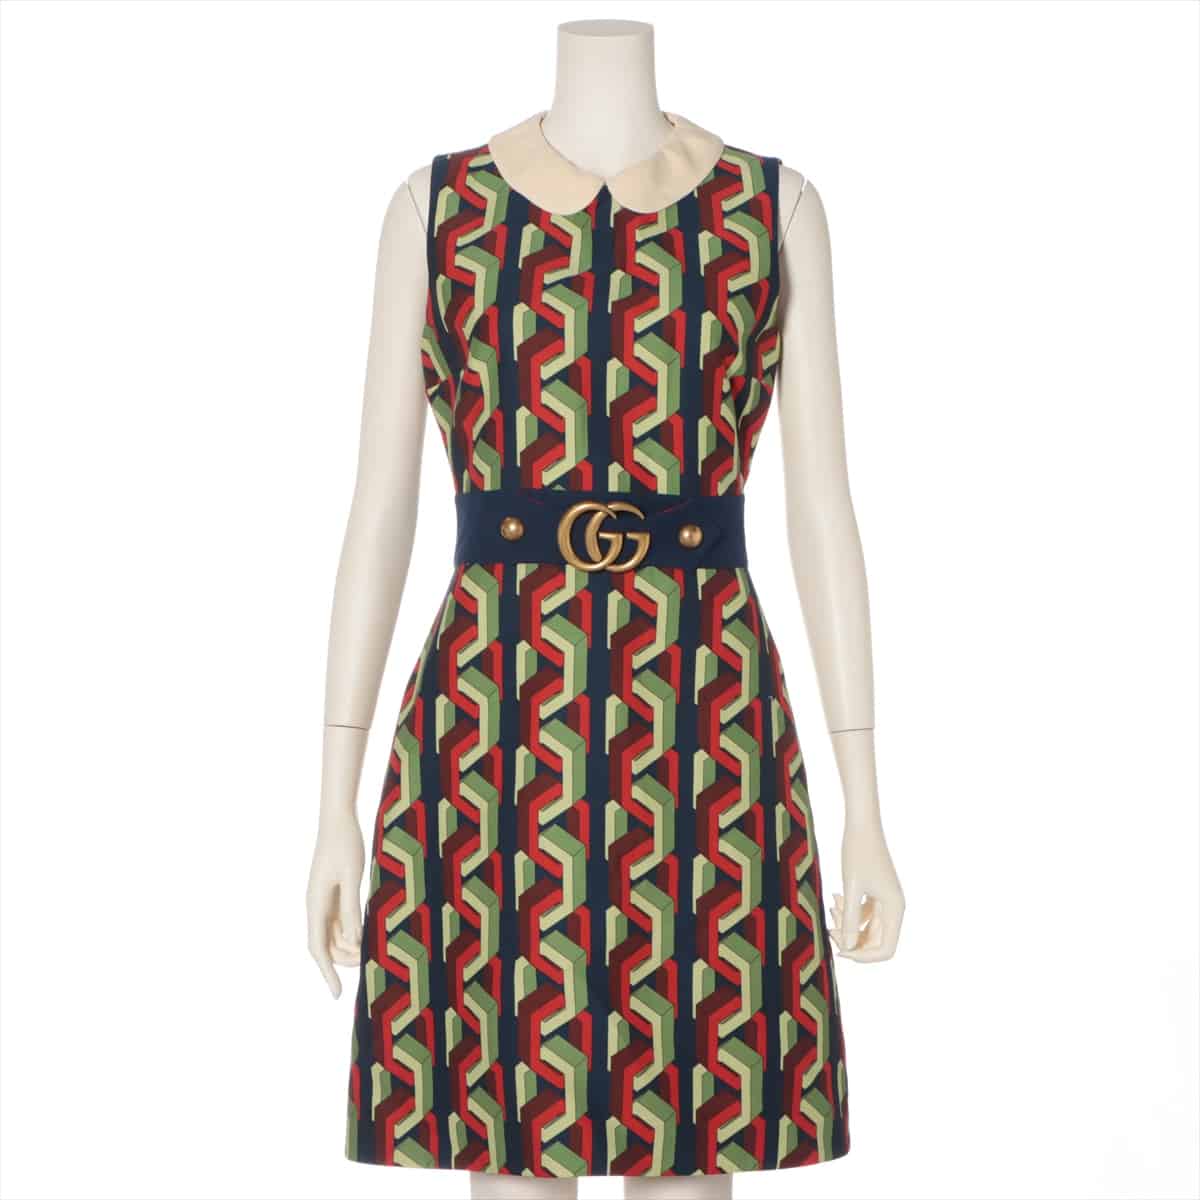 Gucci Wool & Nylon Dress 38 Ladies' Multicolor  GG Chainblint The quality tag is off on one side